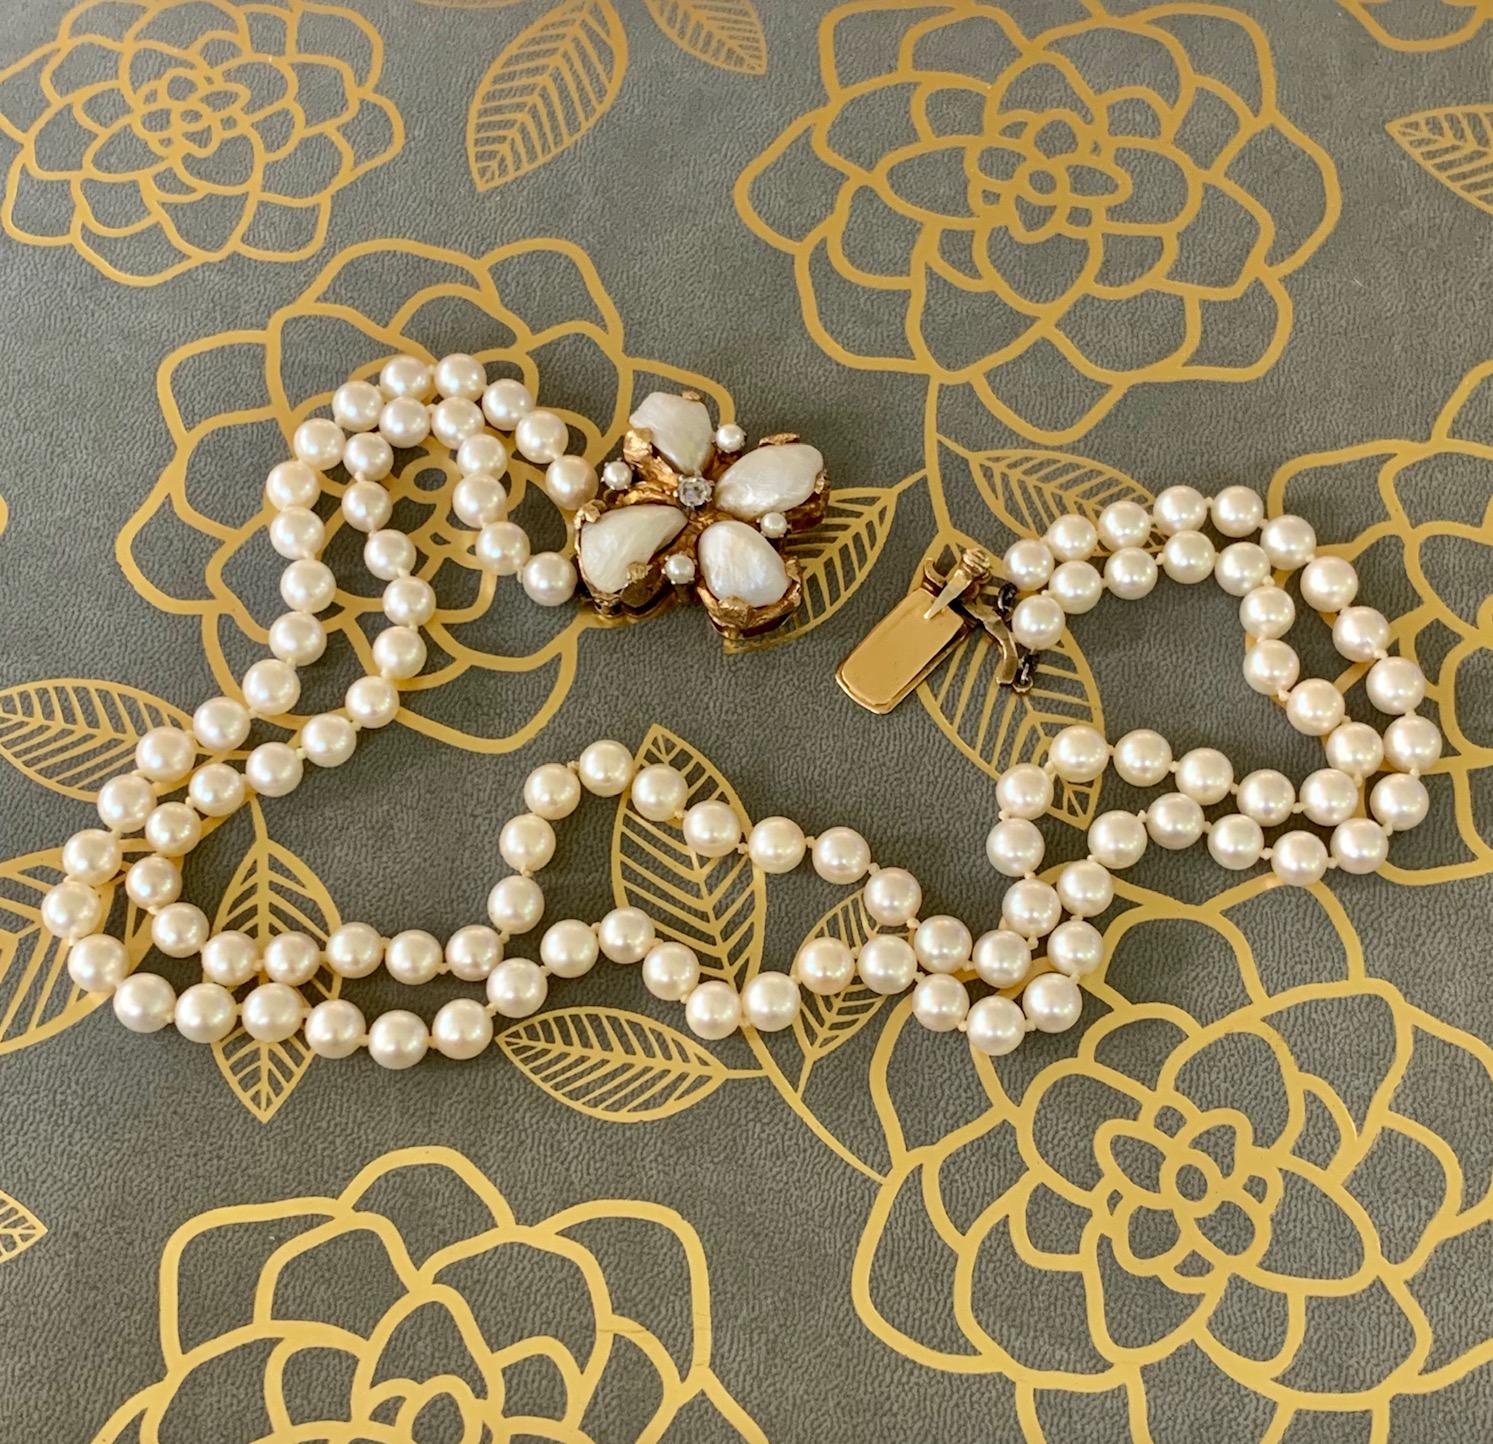 This double strand 6.5mm cream-colored cultured Pearl necklace features a custom made Pearl and Diamond clasp.  The Diamond is mine cut, 3.9mm in size and weighing approximately .25cts.  The clasp also features four Mississippi fan-shaped Pearls